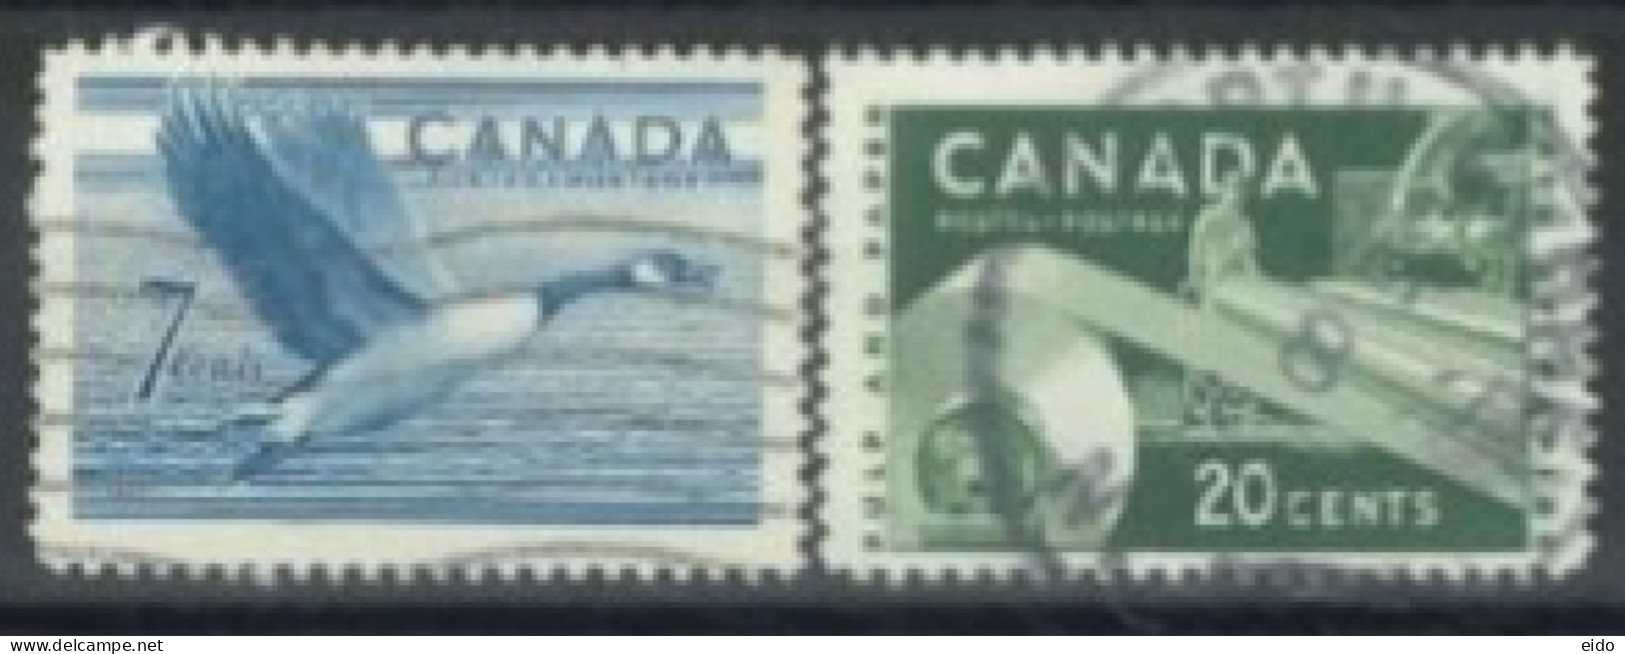 CANADA - 1952/53, CANADIAN GOOSE & PULP & PAPER INDUSTRY. STAMPS SET OF 2, USED. - Used Stamps